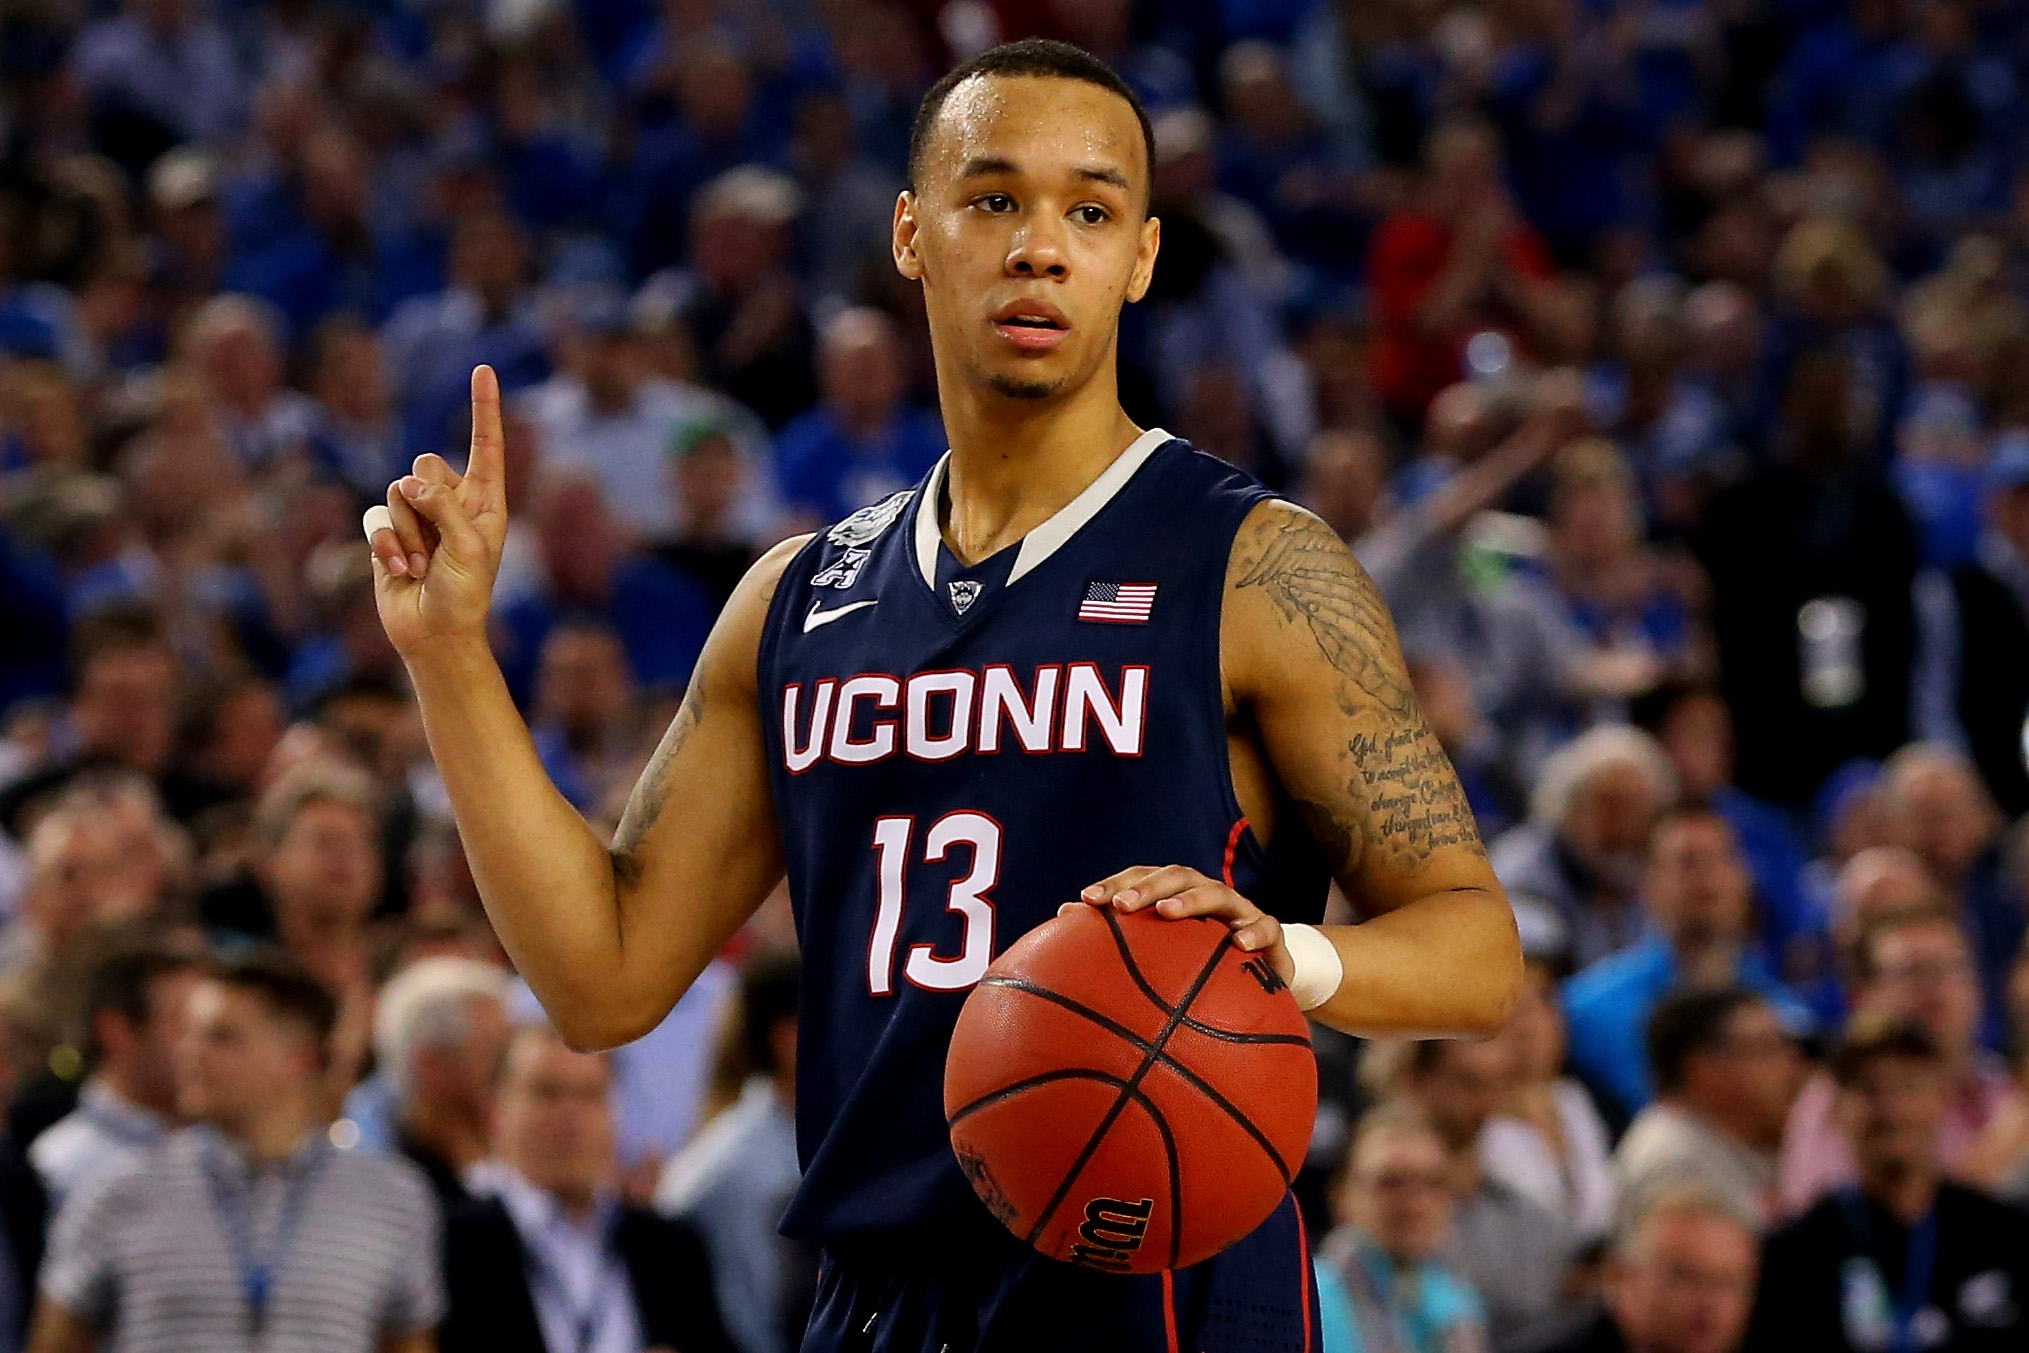 Shabazz Napier of the Connecticut Huskies reacts during the NCAA Men's Final Four Semifinal against the Florida Gators at AT&amp;T Stadium on April 5, 2014 in Arlington, Texas. (Ronald Martinez&mdash;Getty Images)